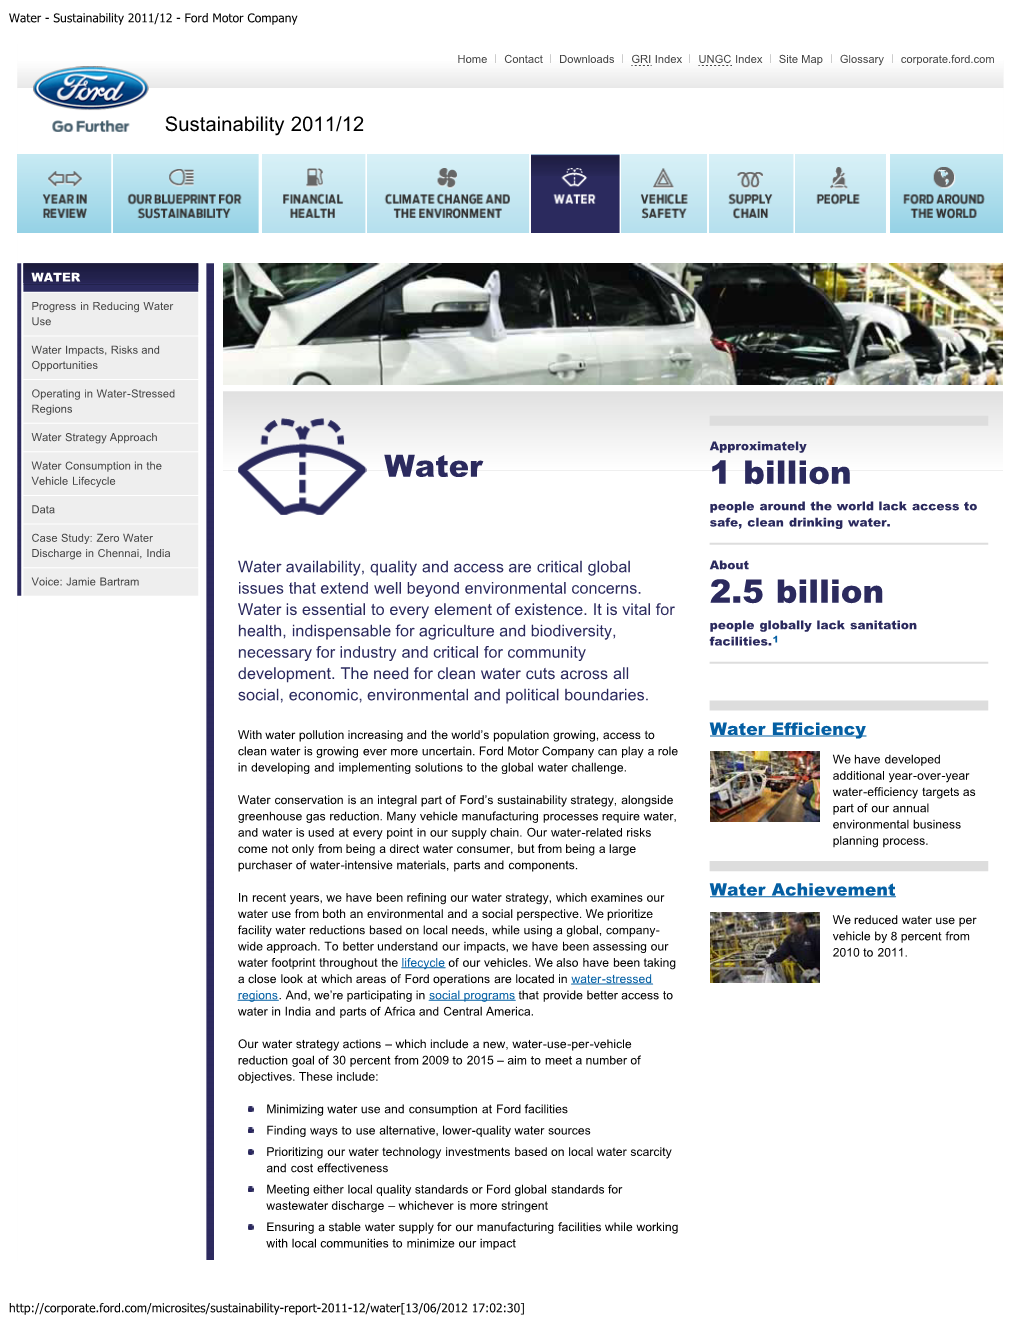 Water - Sustainability 2011/12 - Ford Motor Company